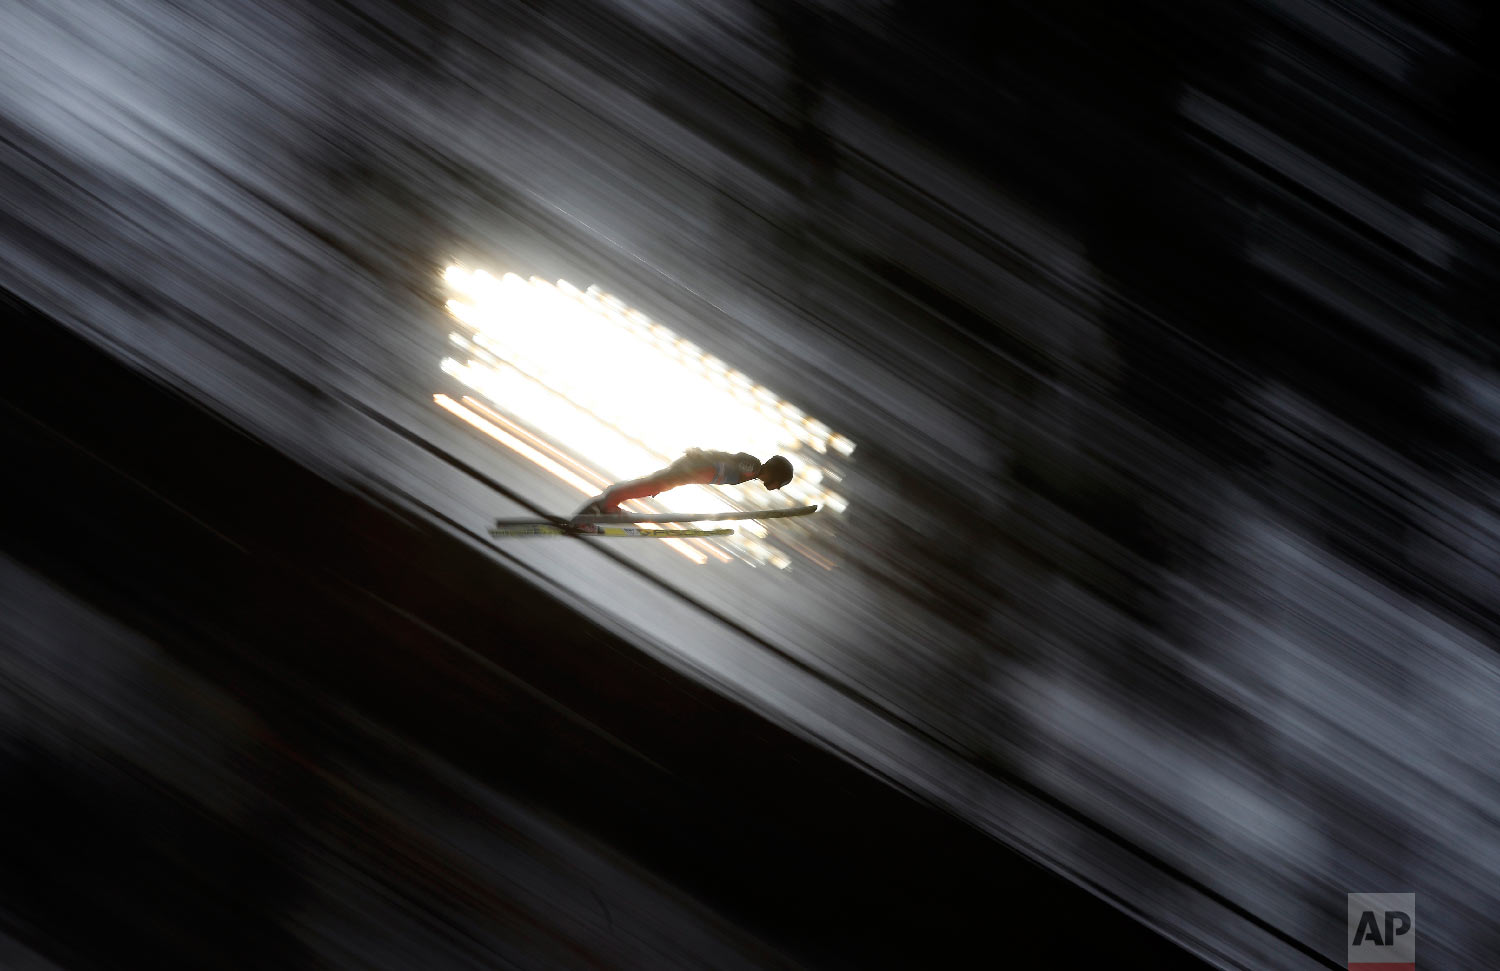  An unidentified athlete makes his trial jump at the ski jump in Bischofshofen, Austria, the fourth stage of the Four Hills Ski Jumping event on Jan. 5, 2018. (AP Photo/Matthias Schrader) 